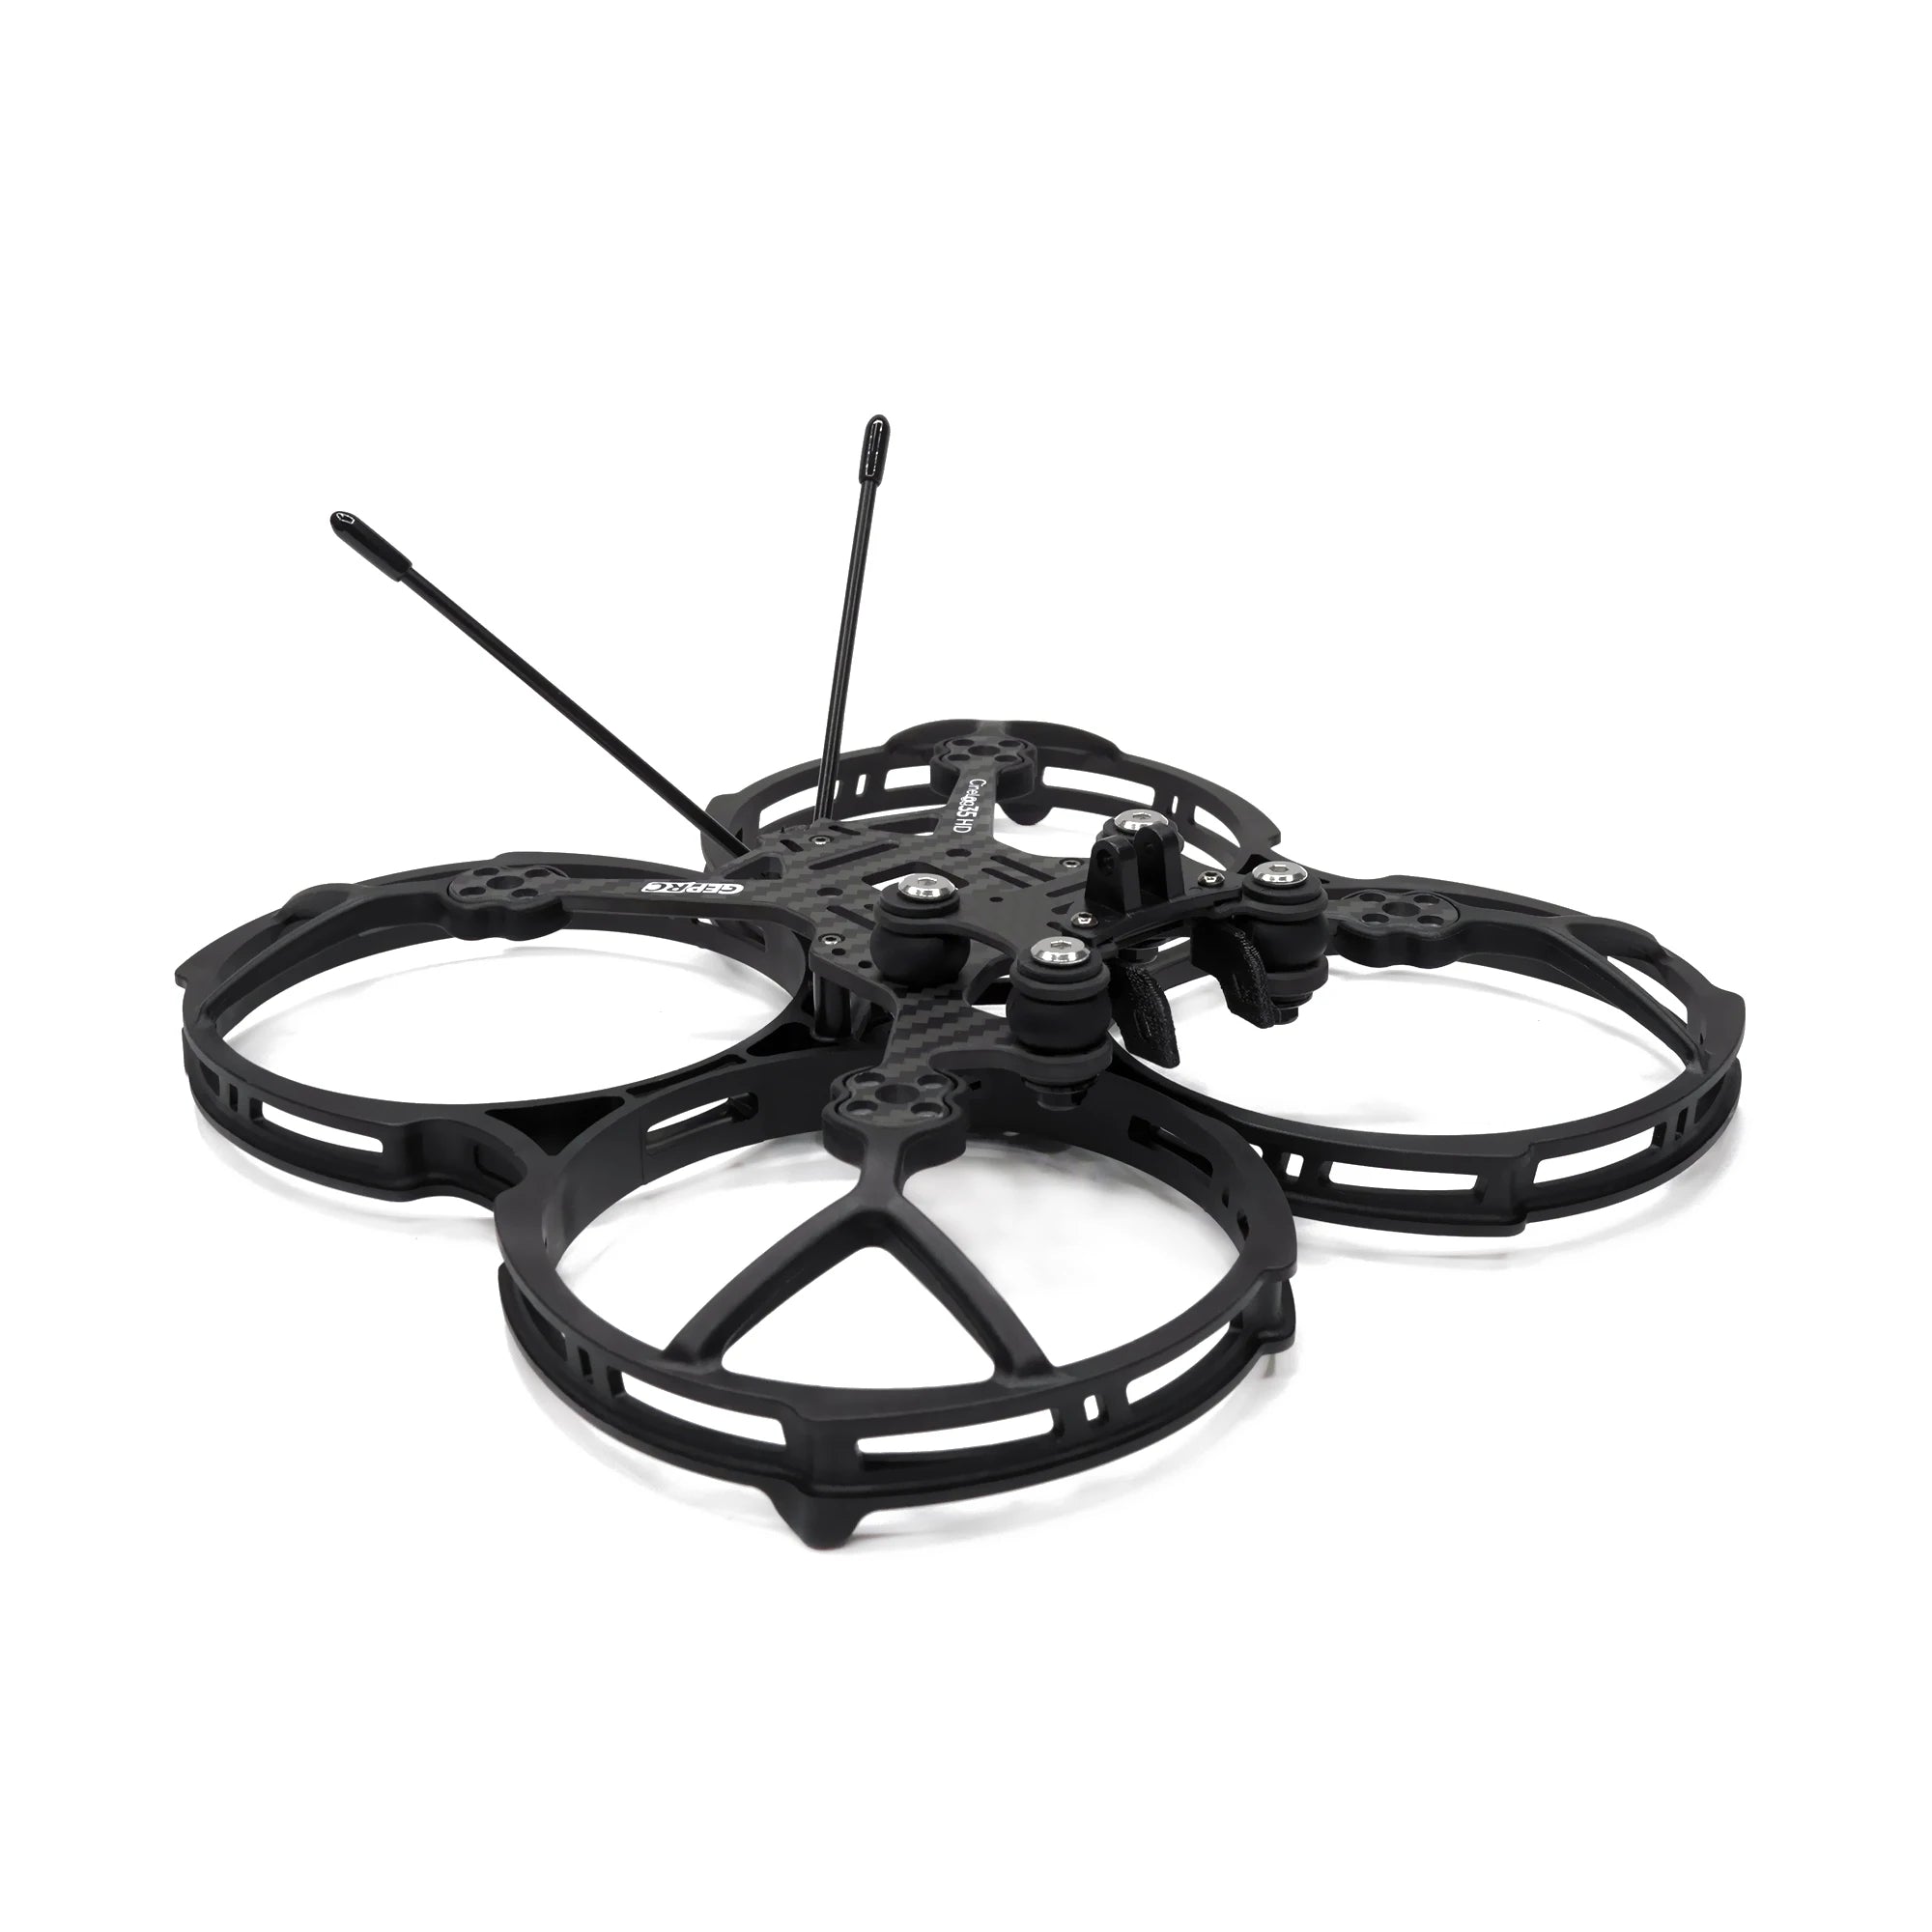 this frame kit enhances the flight performance and longevity of your drone . with its carbon fiber